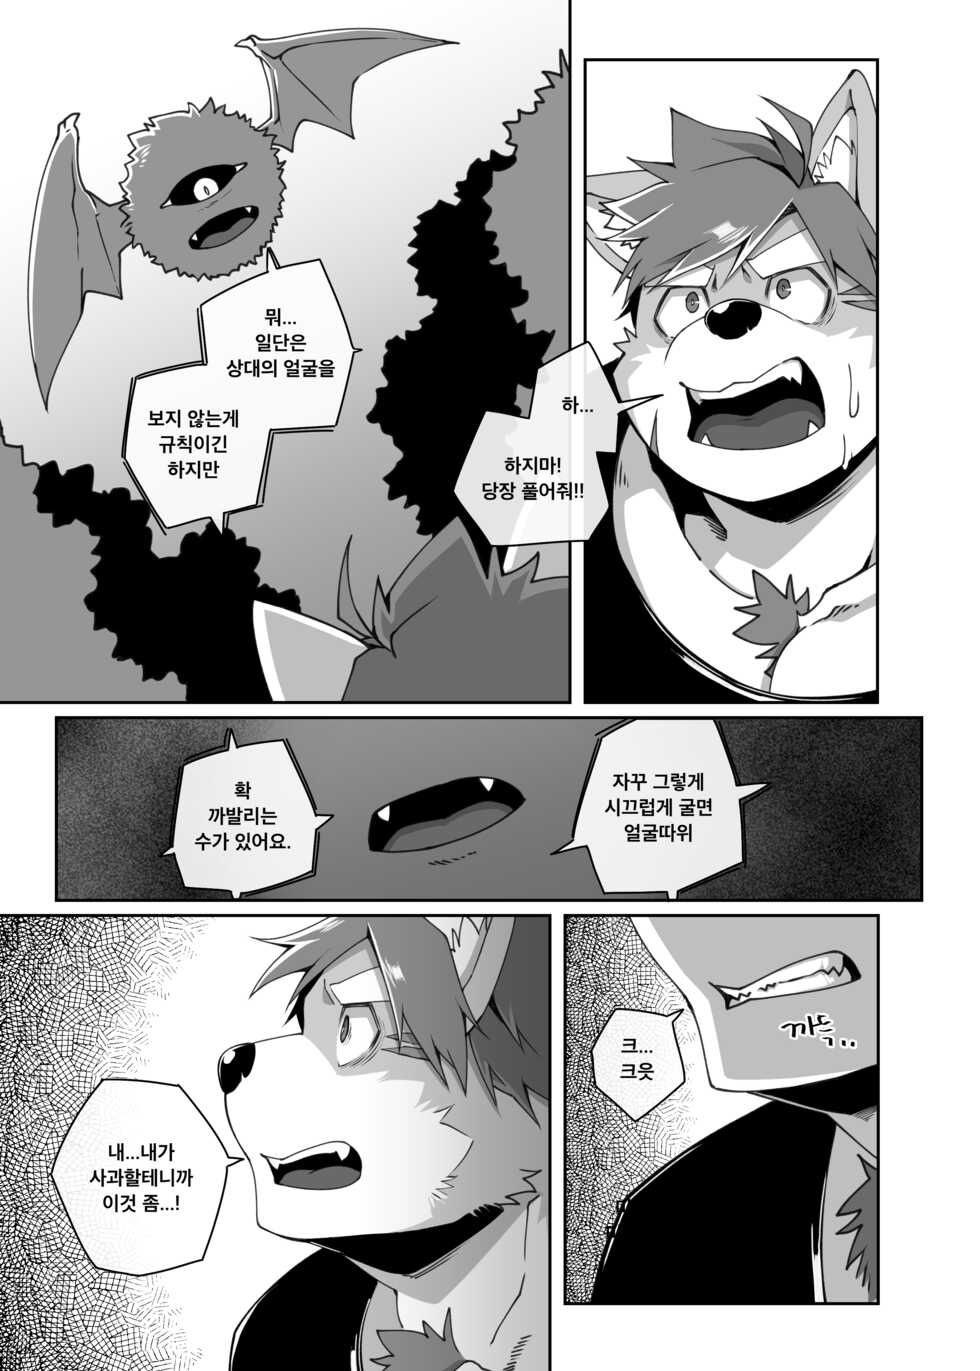 [MIKKY] Hero's Deepest Secret Ep.2 [Korean] [Uncensored] - Page 9